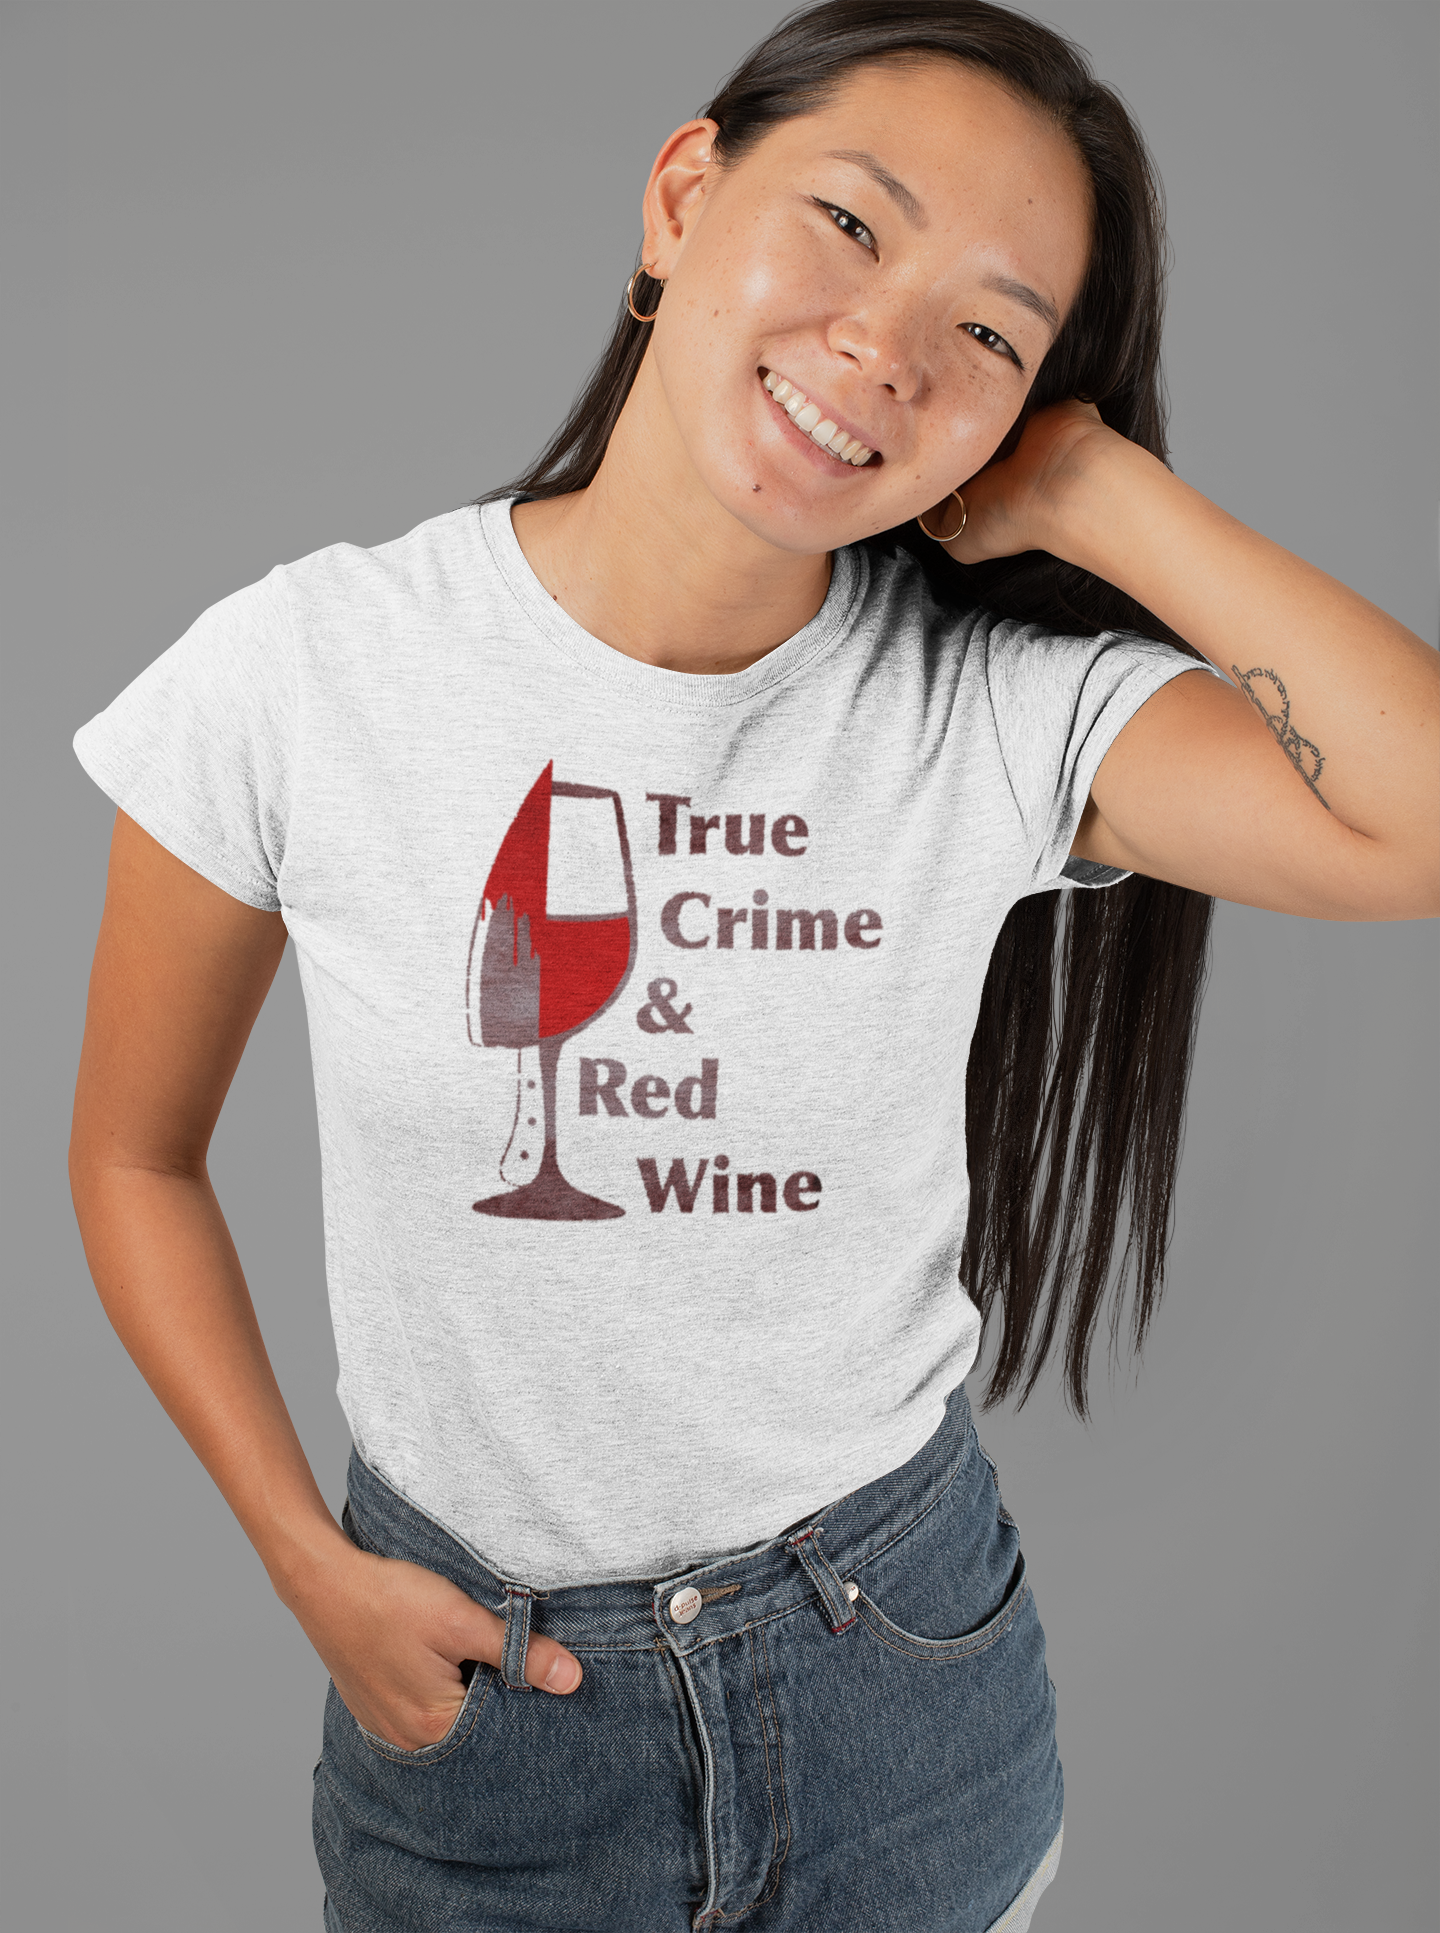 True Crime and Red Wine - Women's Triblend Tee